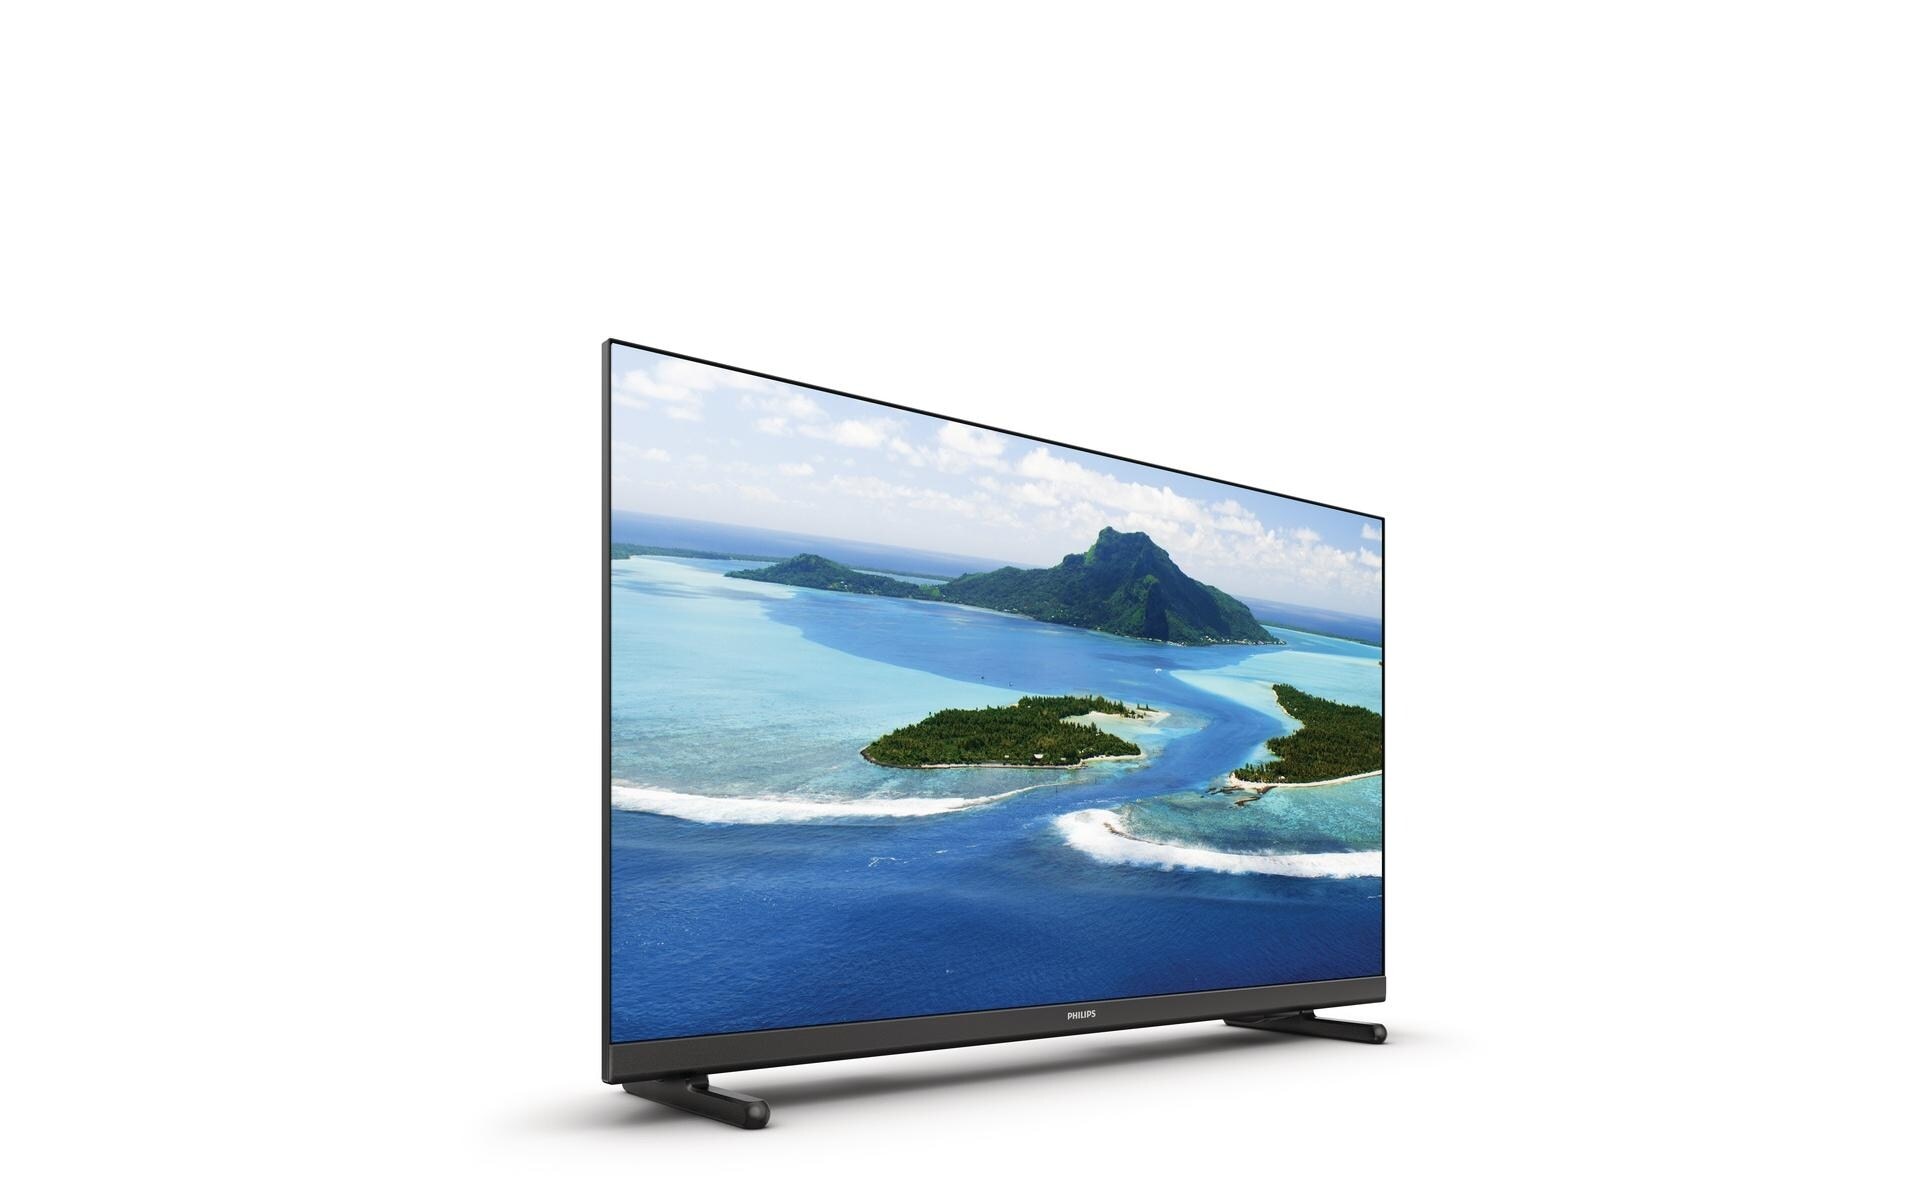 Philips LCD-LED Fernseher 60 Trouver sur Zoll, 24 WXGA cm/24 »24PHS5507/12, LED-«